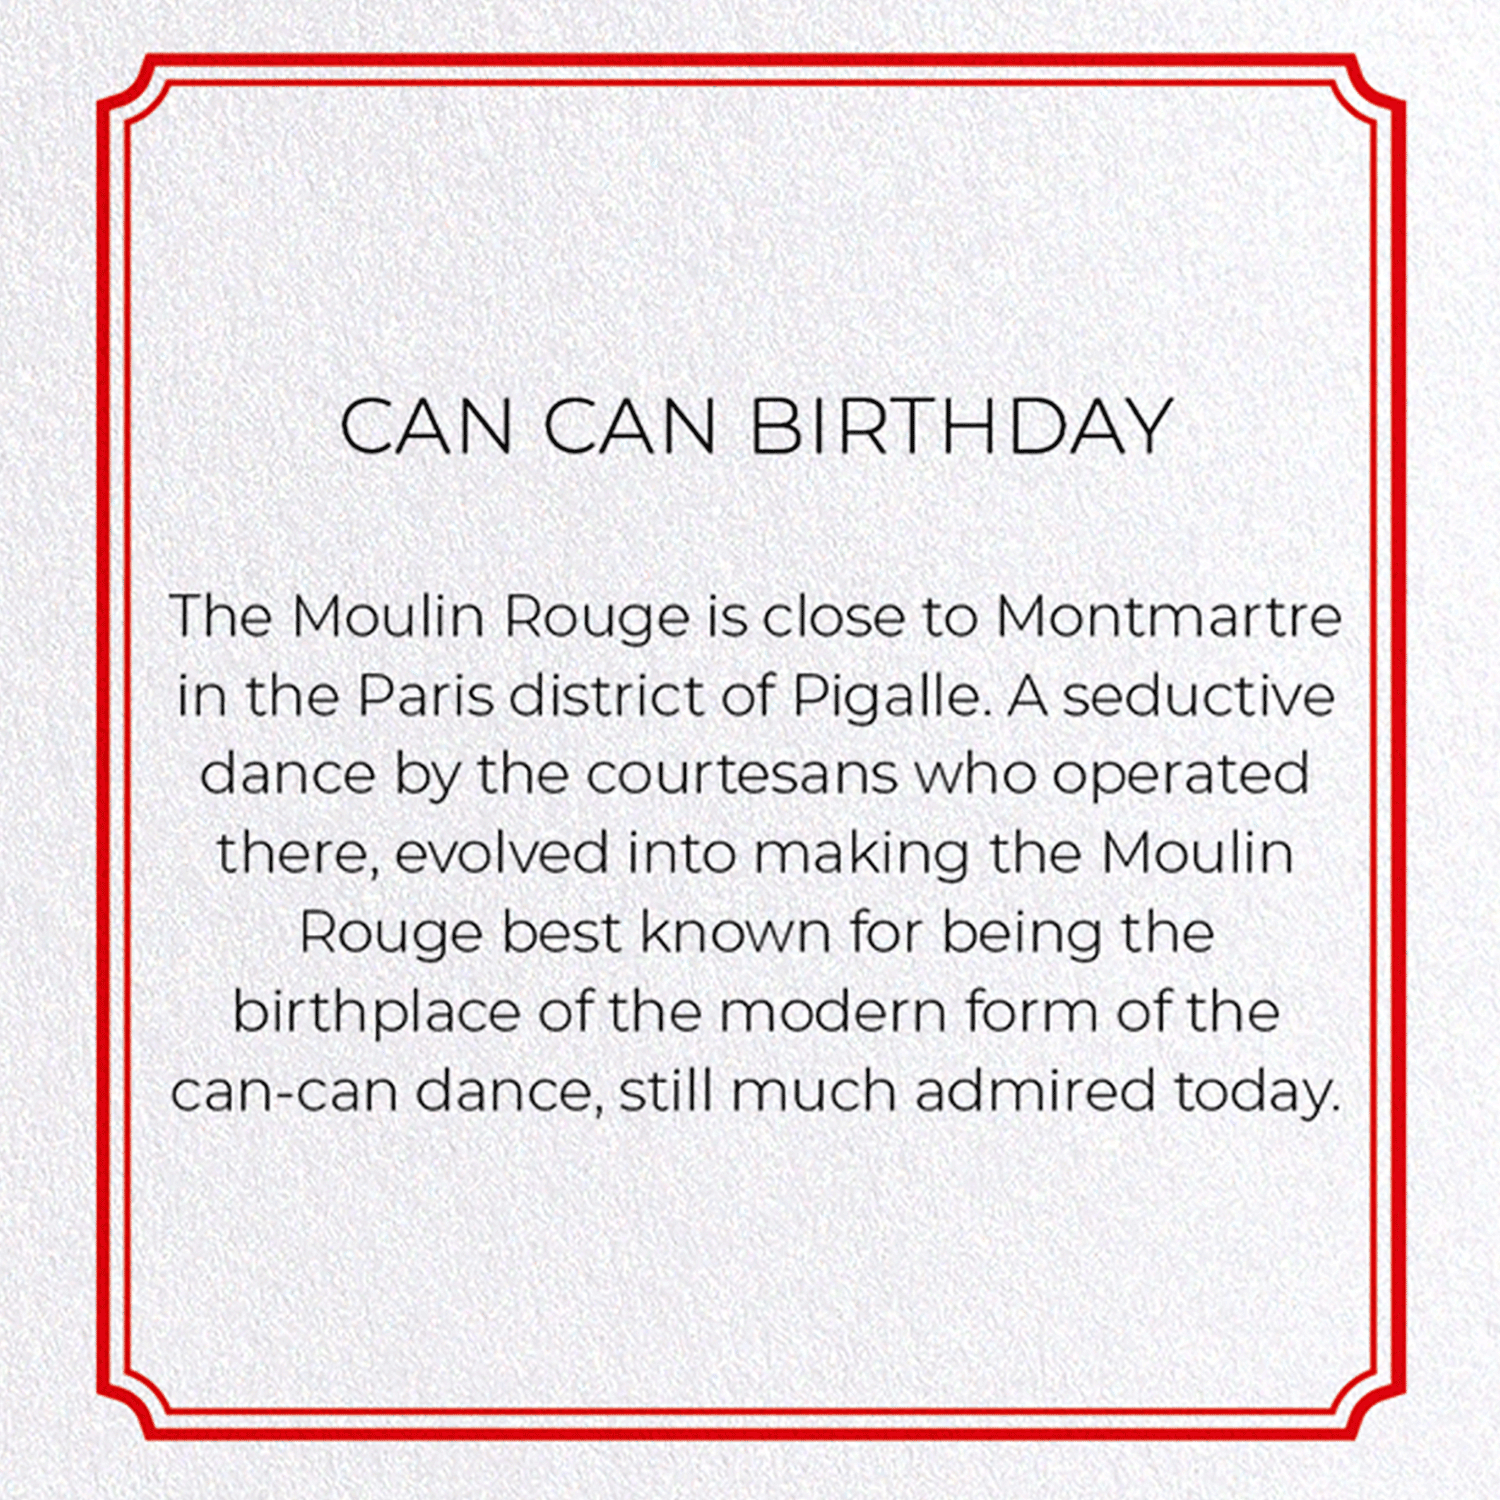 CAN CAN BIRTHDAY: Vintage Greeting Card